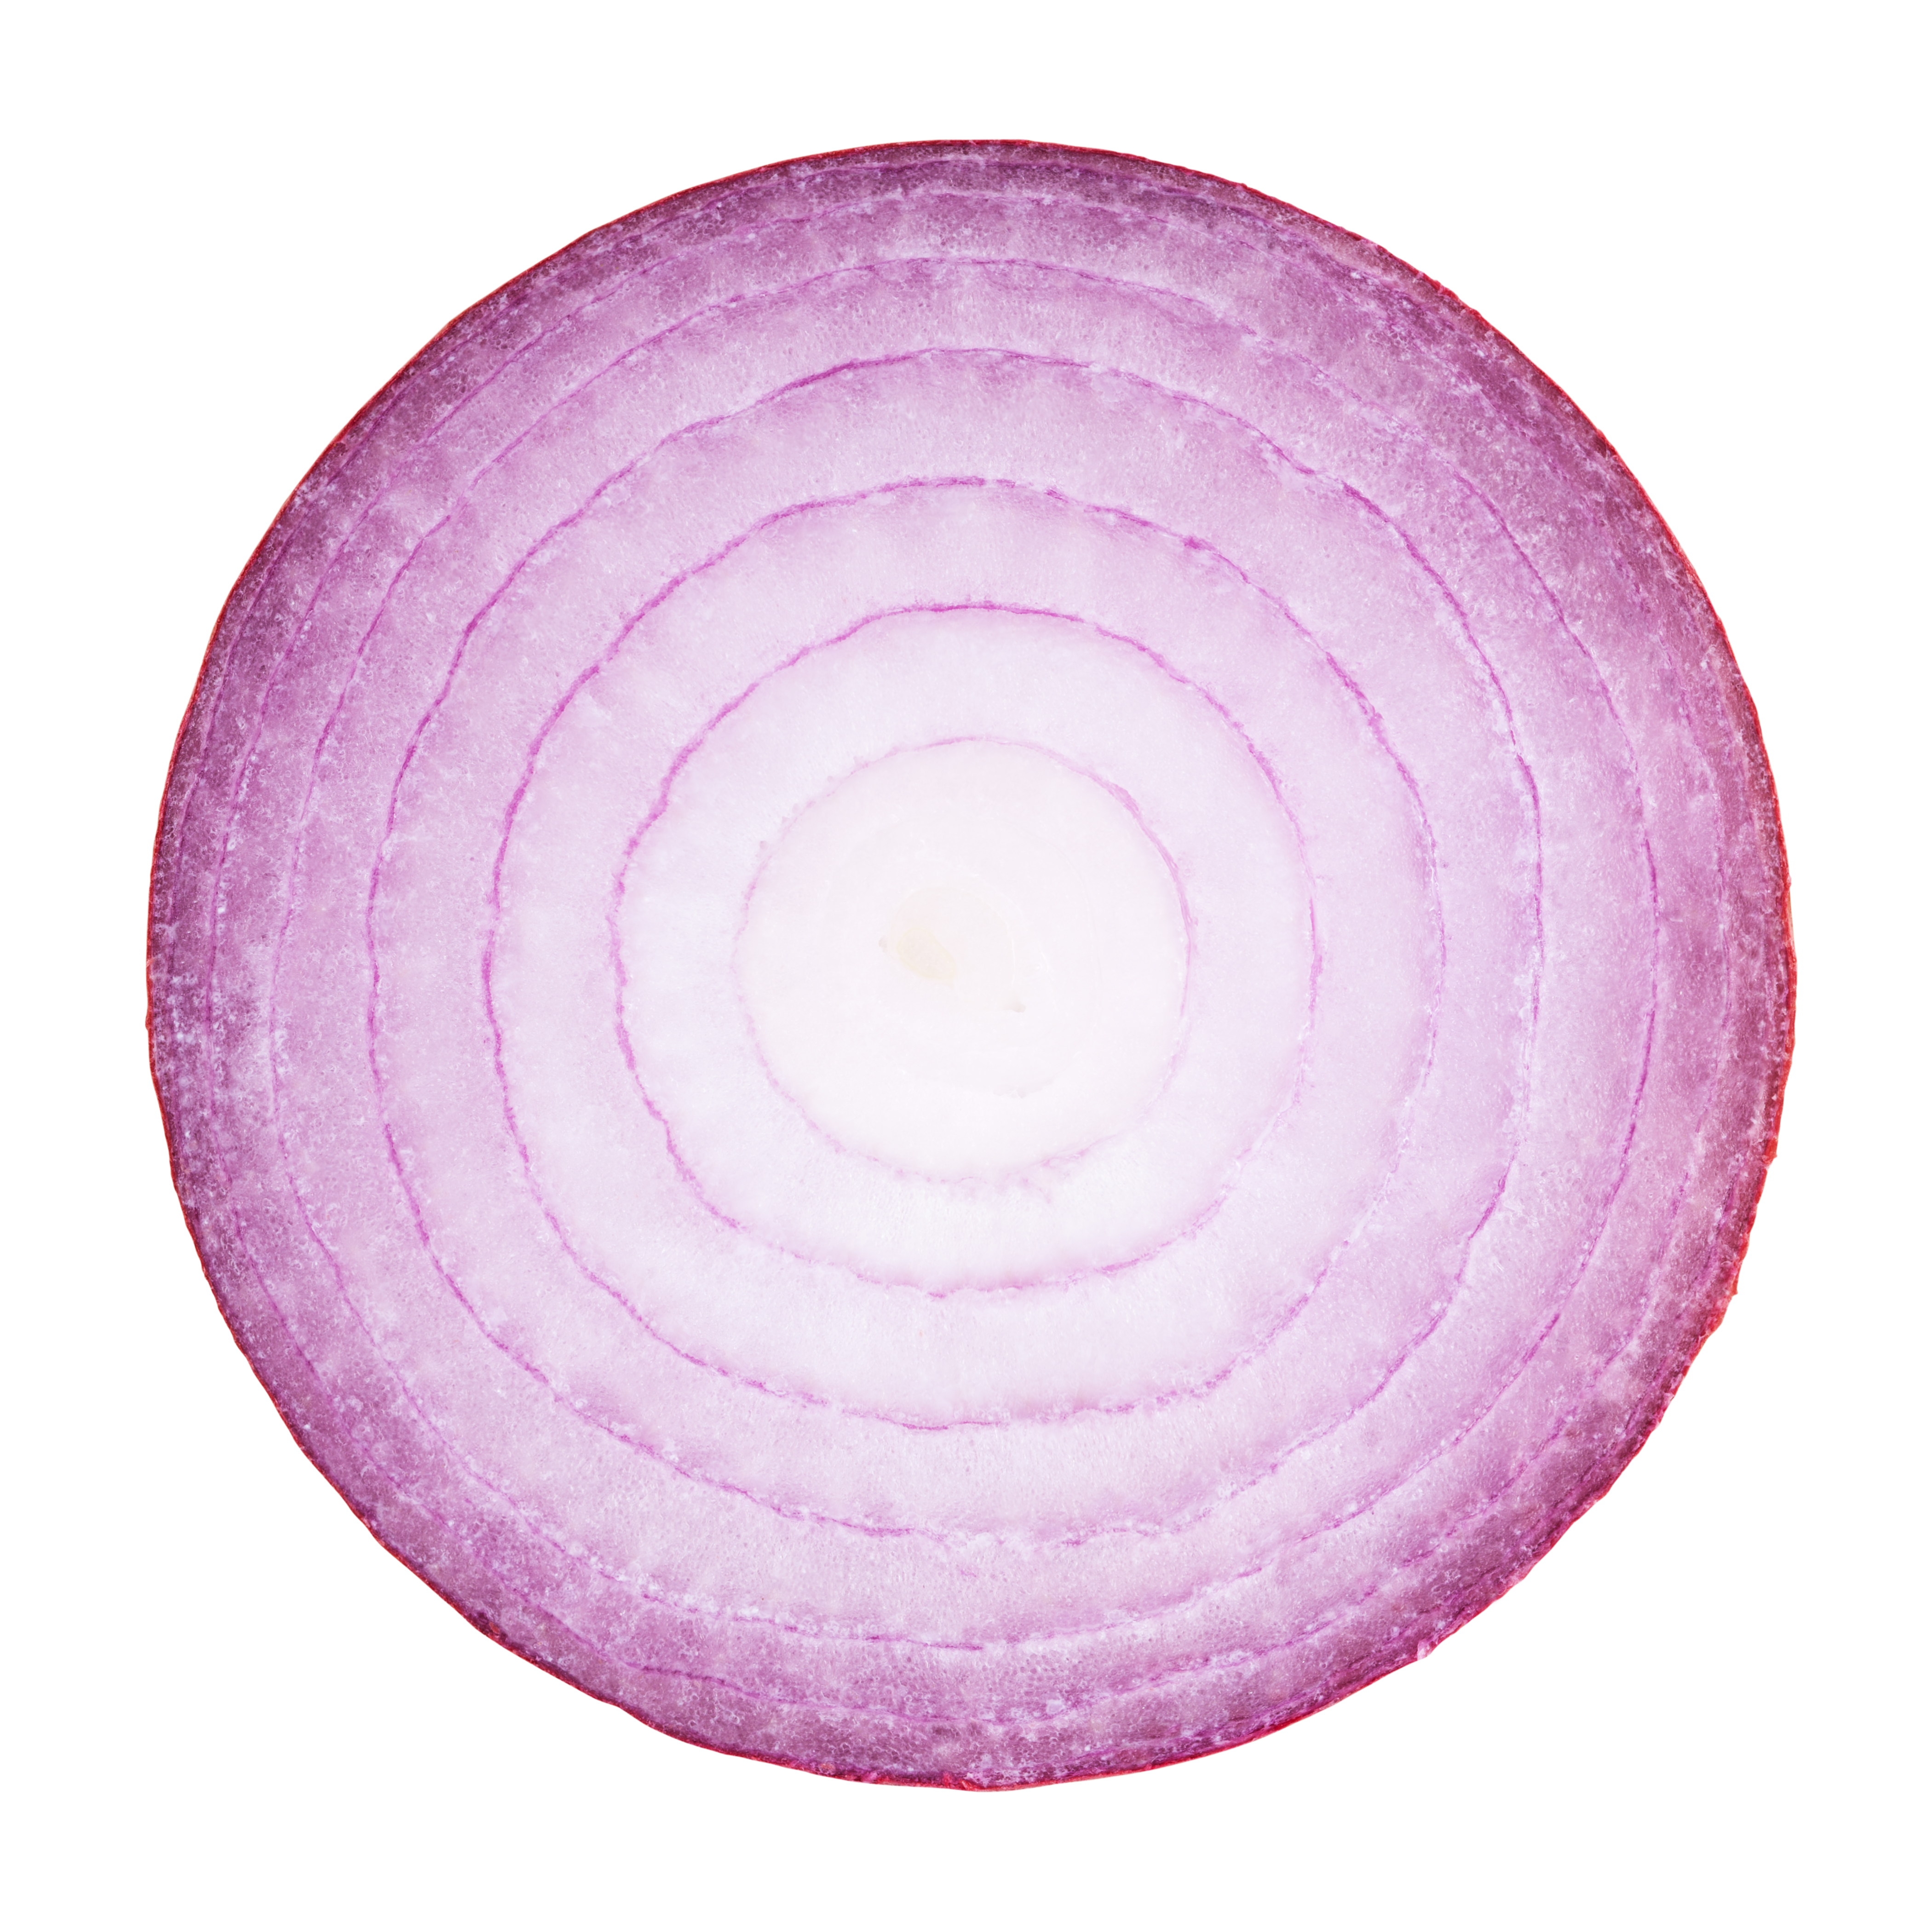 A sliced red onion